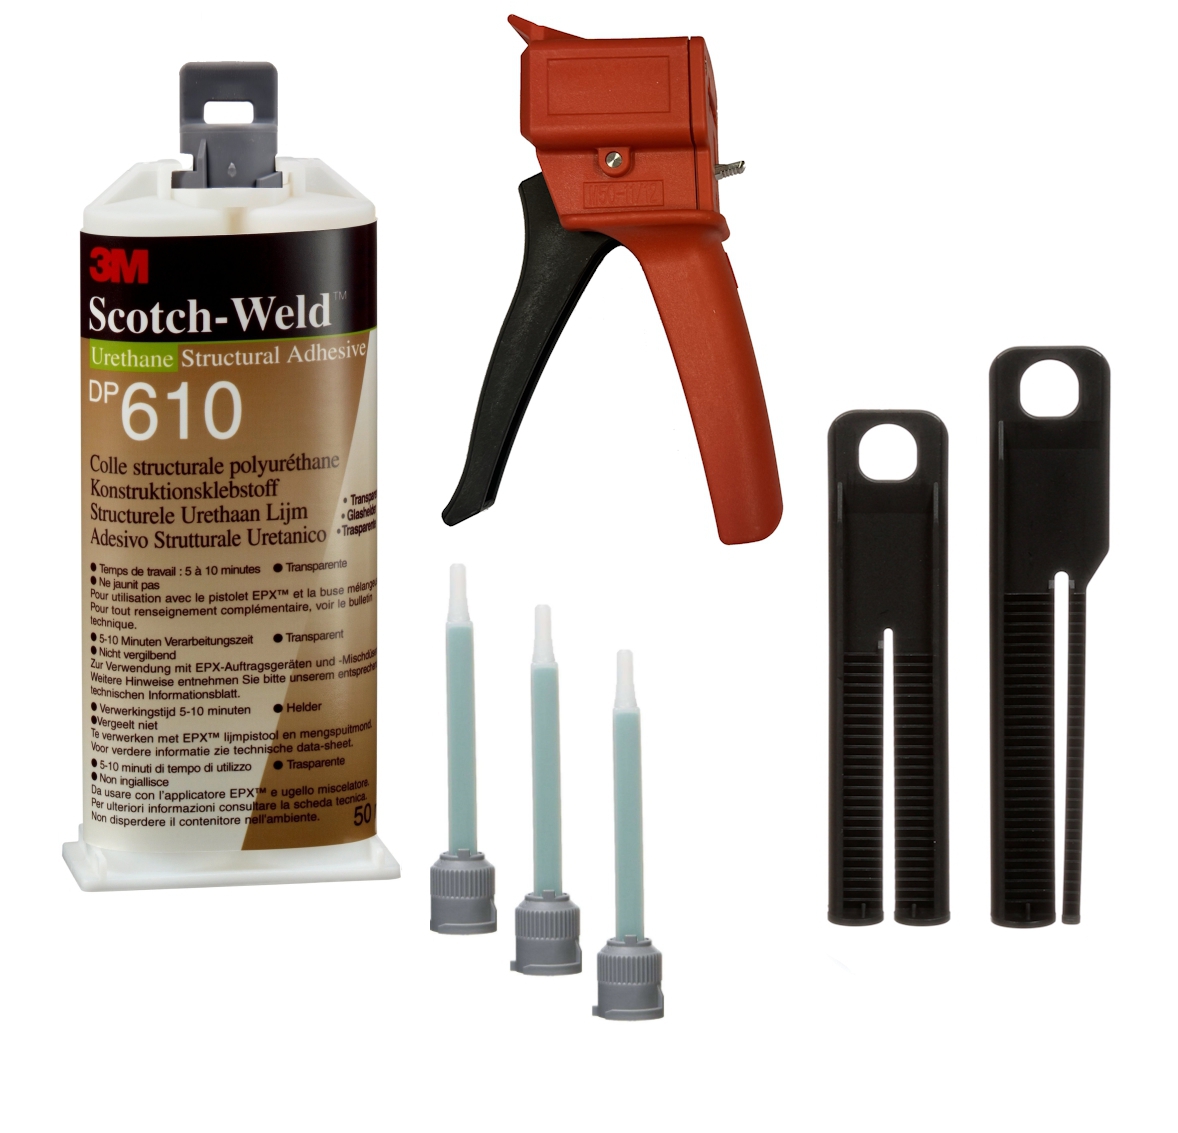 Starter set: 1x 3M Scotch-Weld 2-component construction adhesive EPX DP610, transparent, 48.5 ml, 1x S-K-S hand tool for EPX 38 to 50 ml cartridges incl. feed piston 2:1